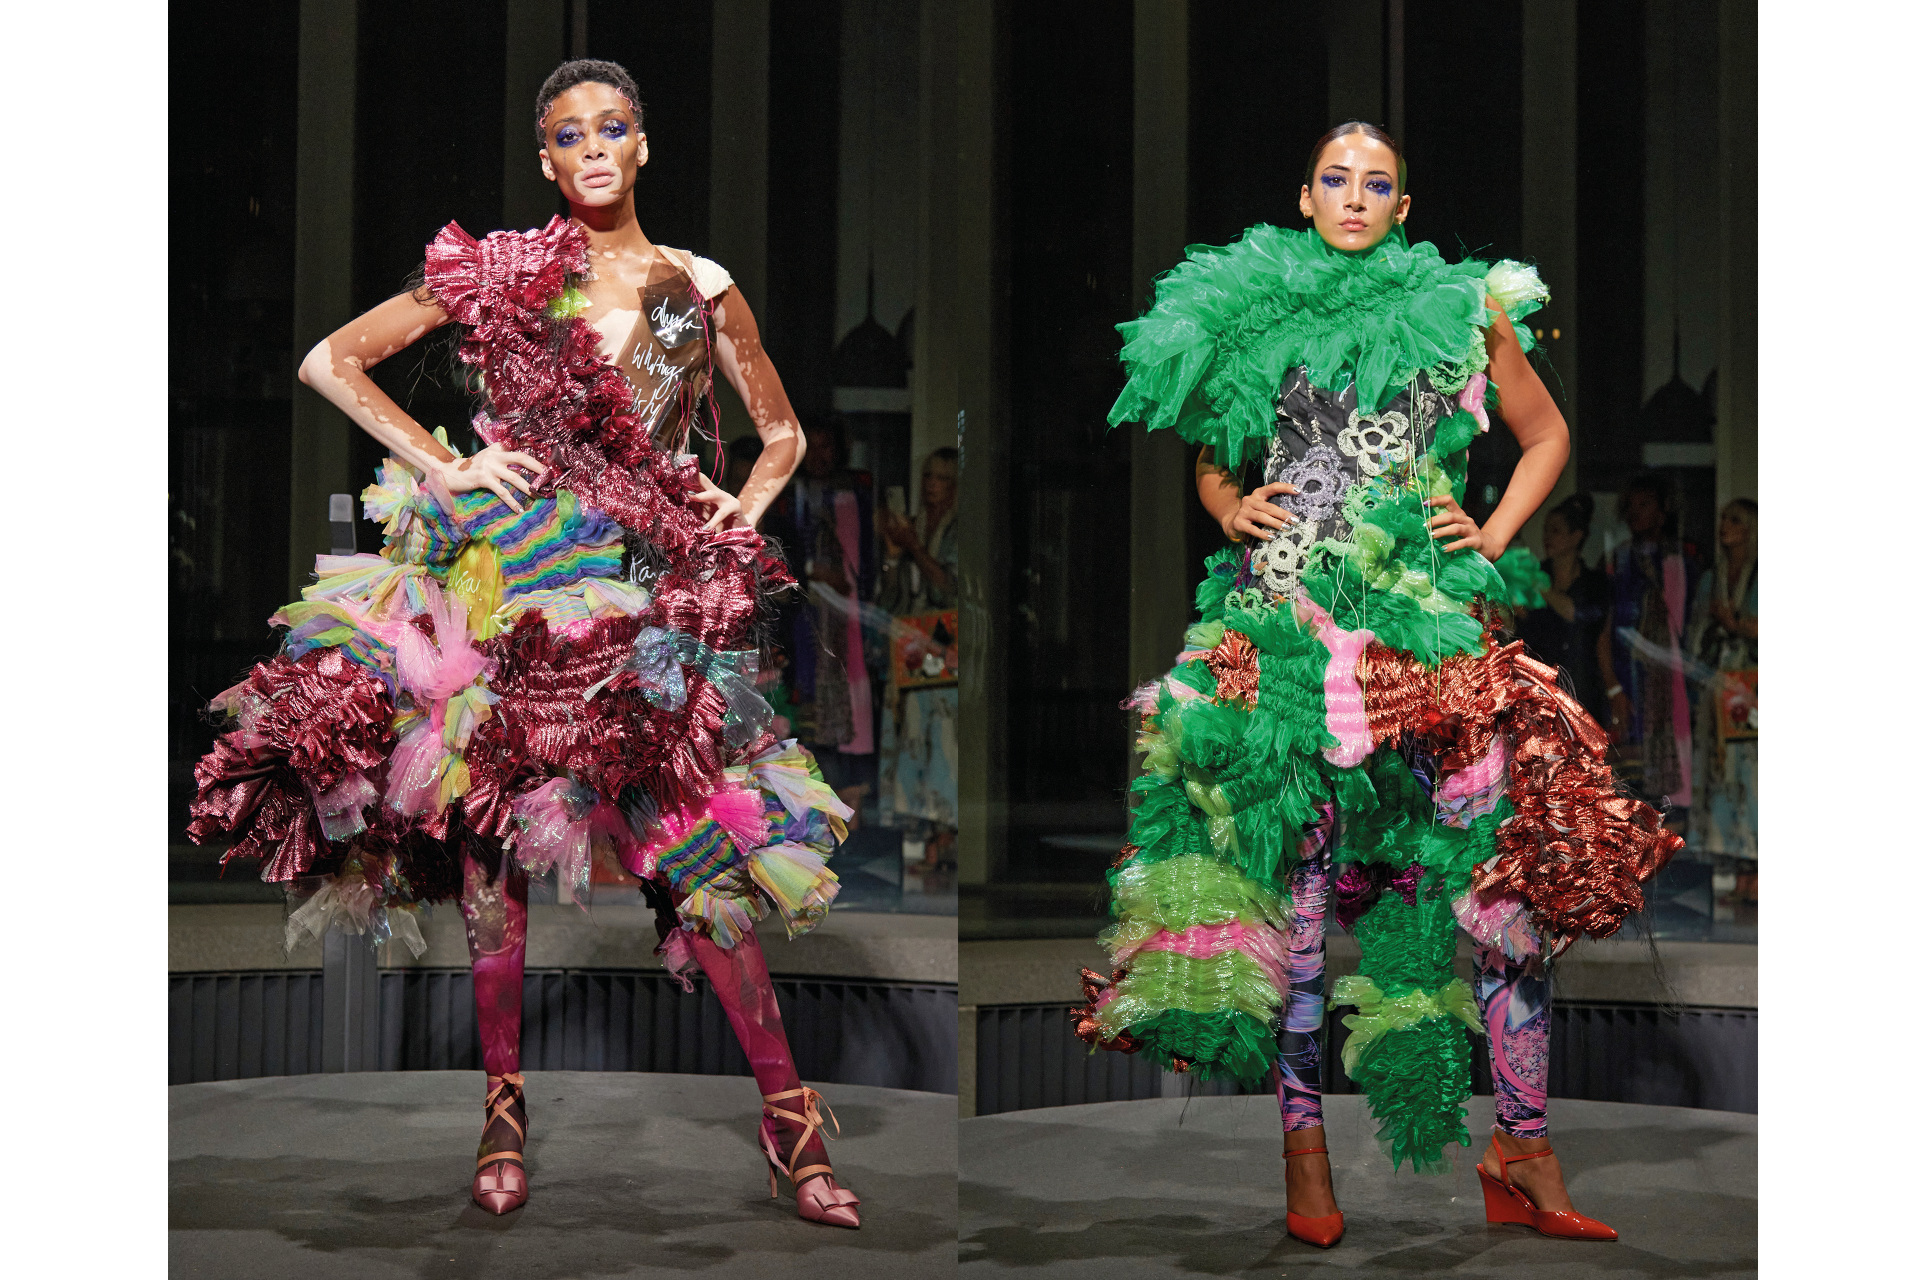 Fashion show with looks made from waste materials